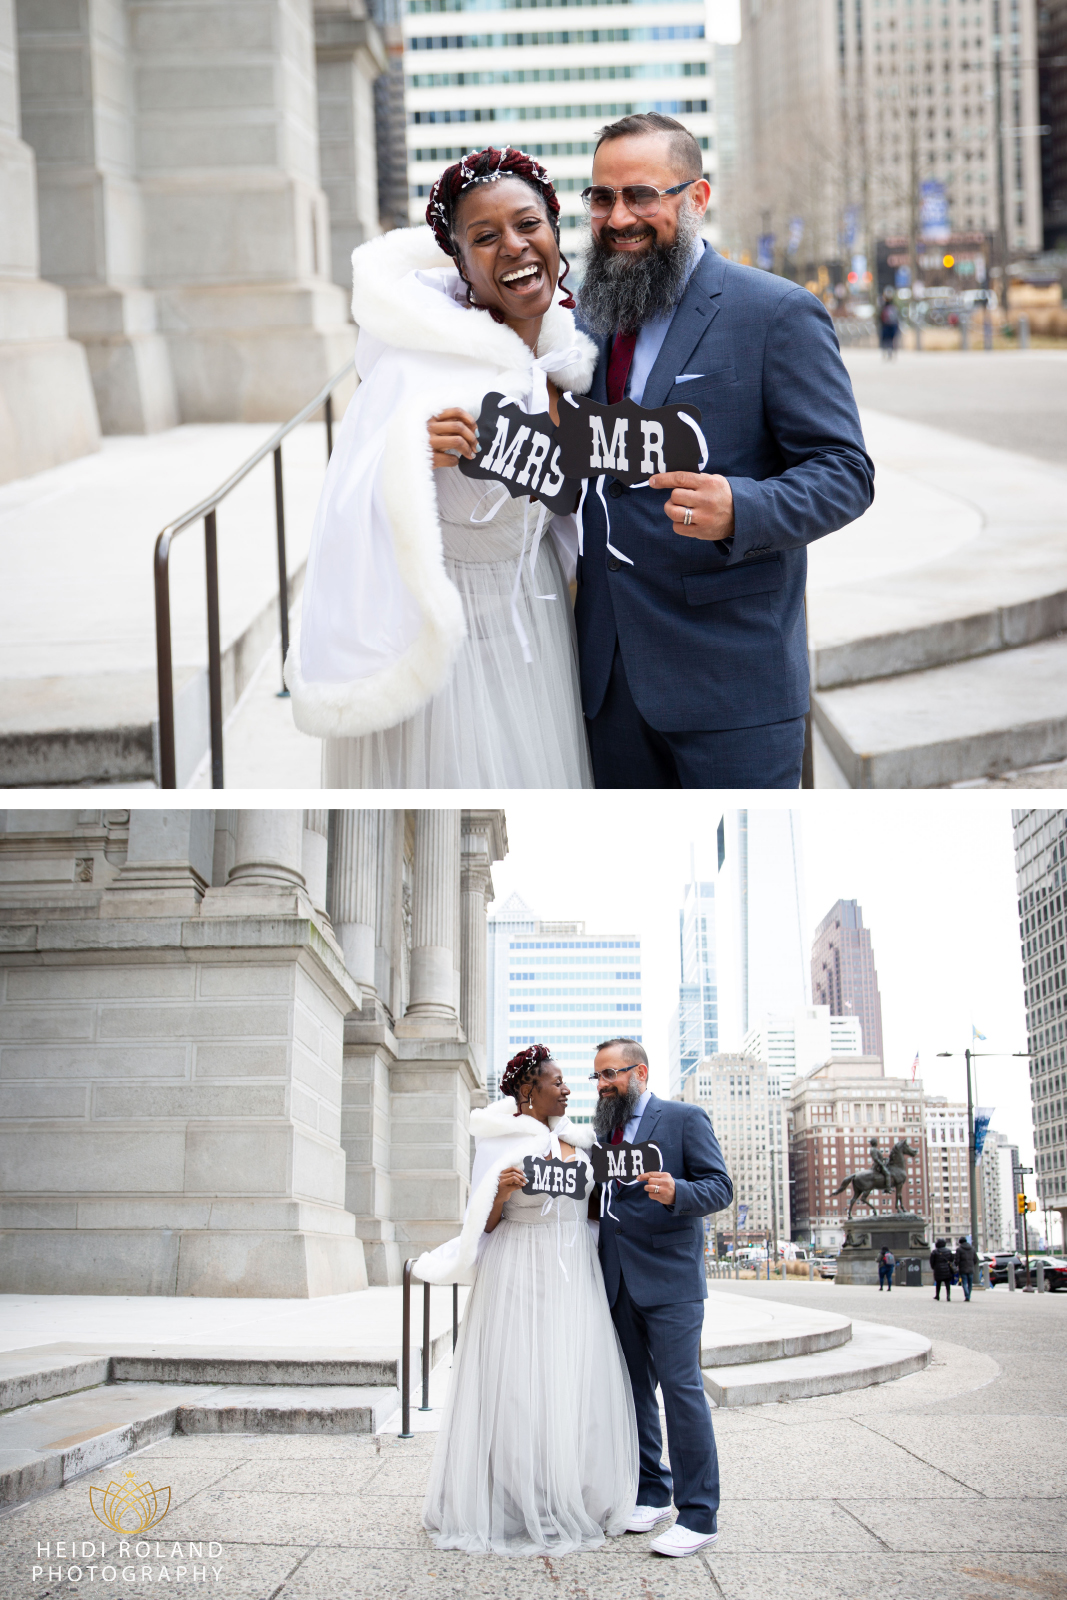 Mr and Mrs wedding photos Philly